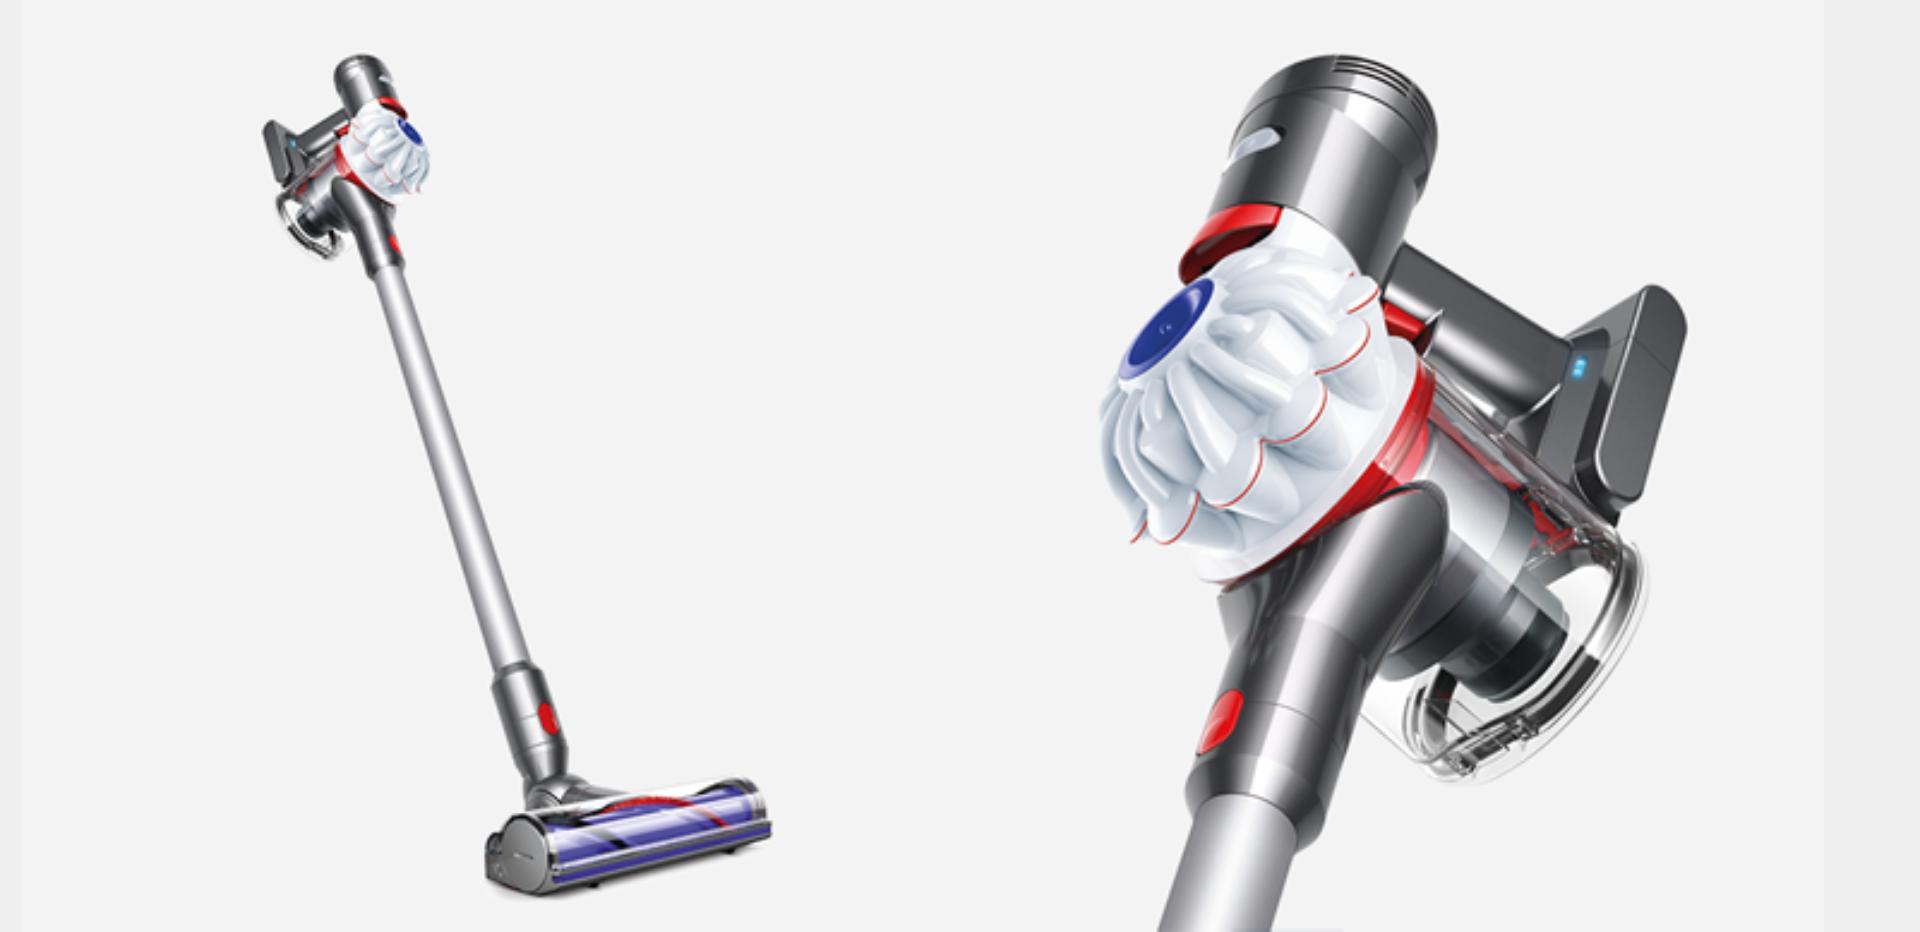 Dyson v7 Cord-free vacuum cleaner